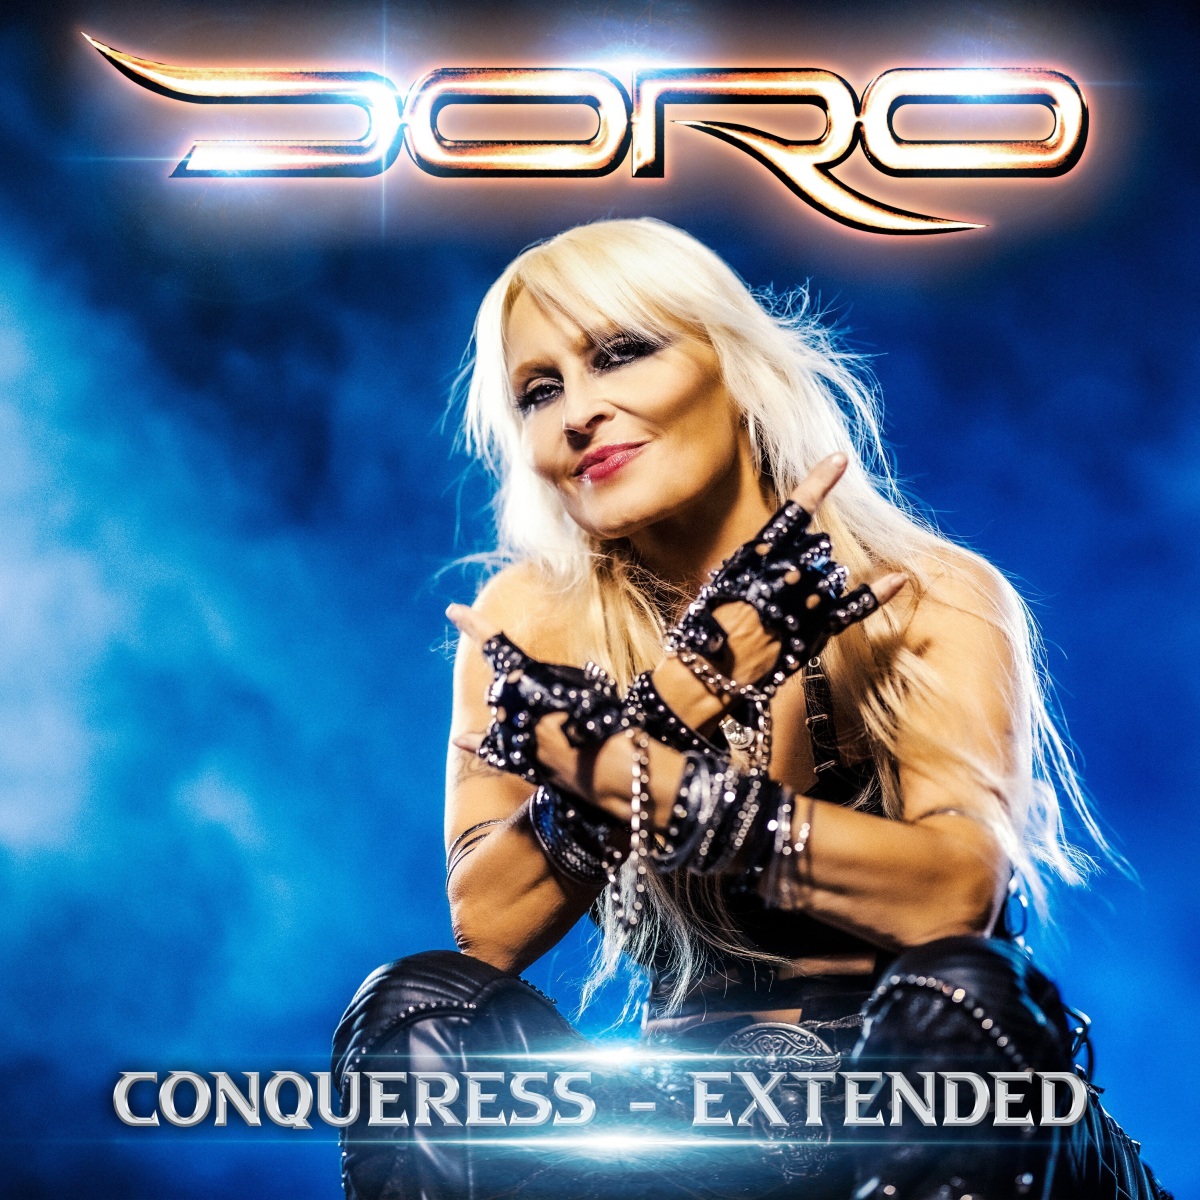 Doro - Conqueress - Extended